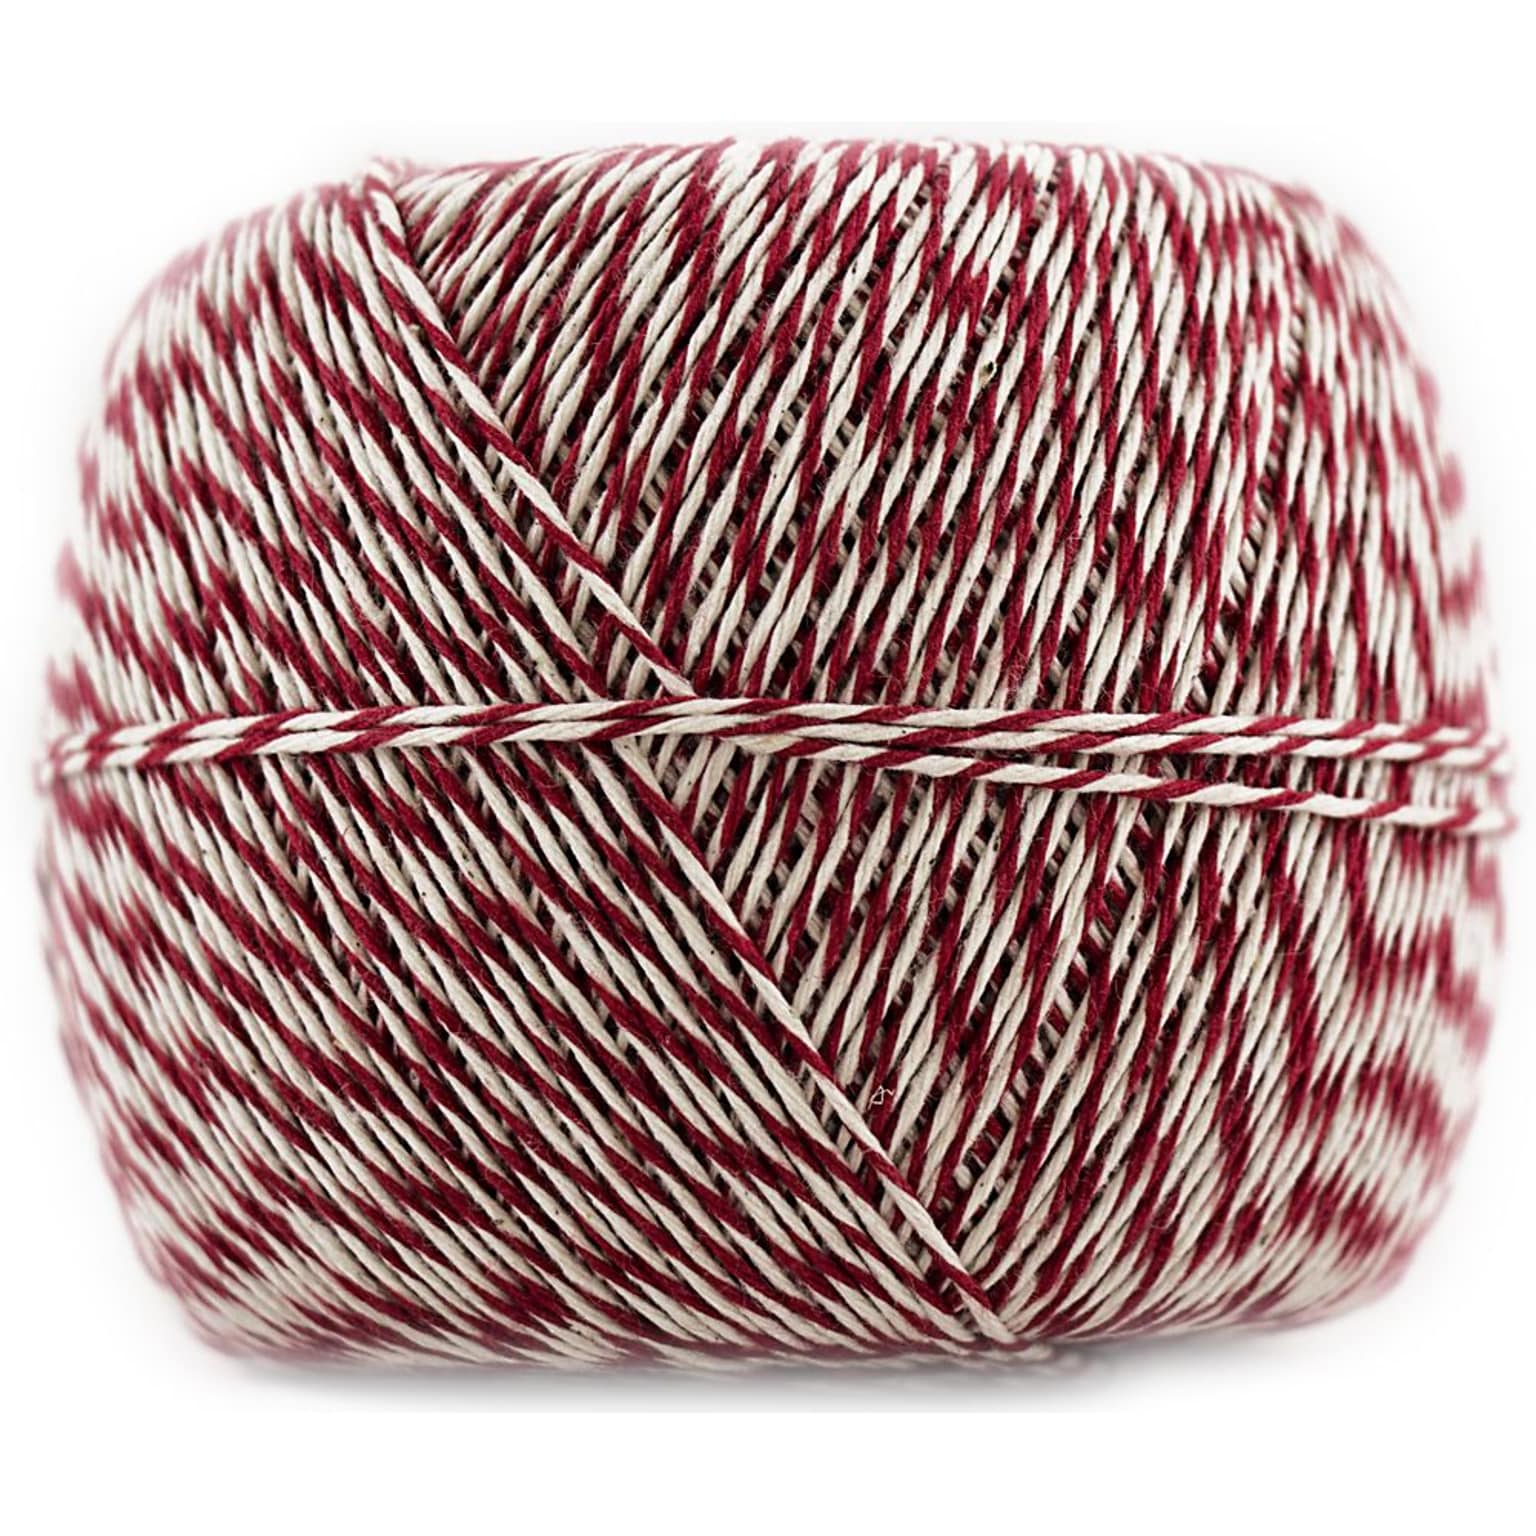 JAM Paper® Bakers Twine, Red & White, 500 Yards, Sold Individually (349527465)